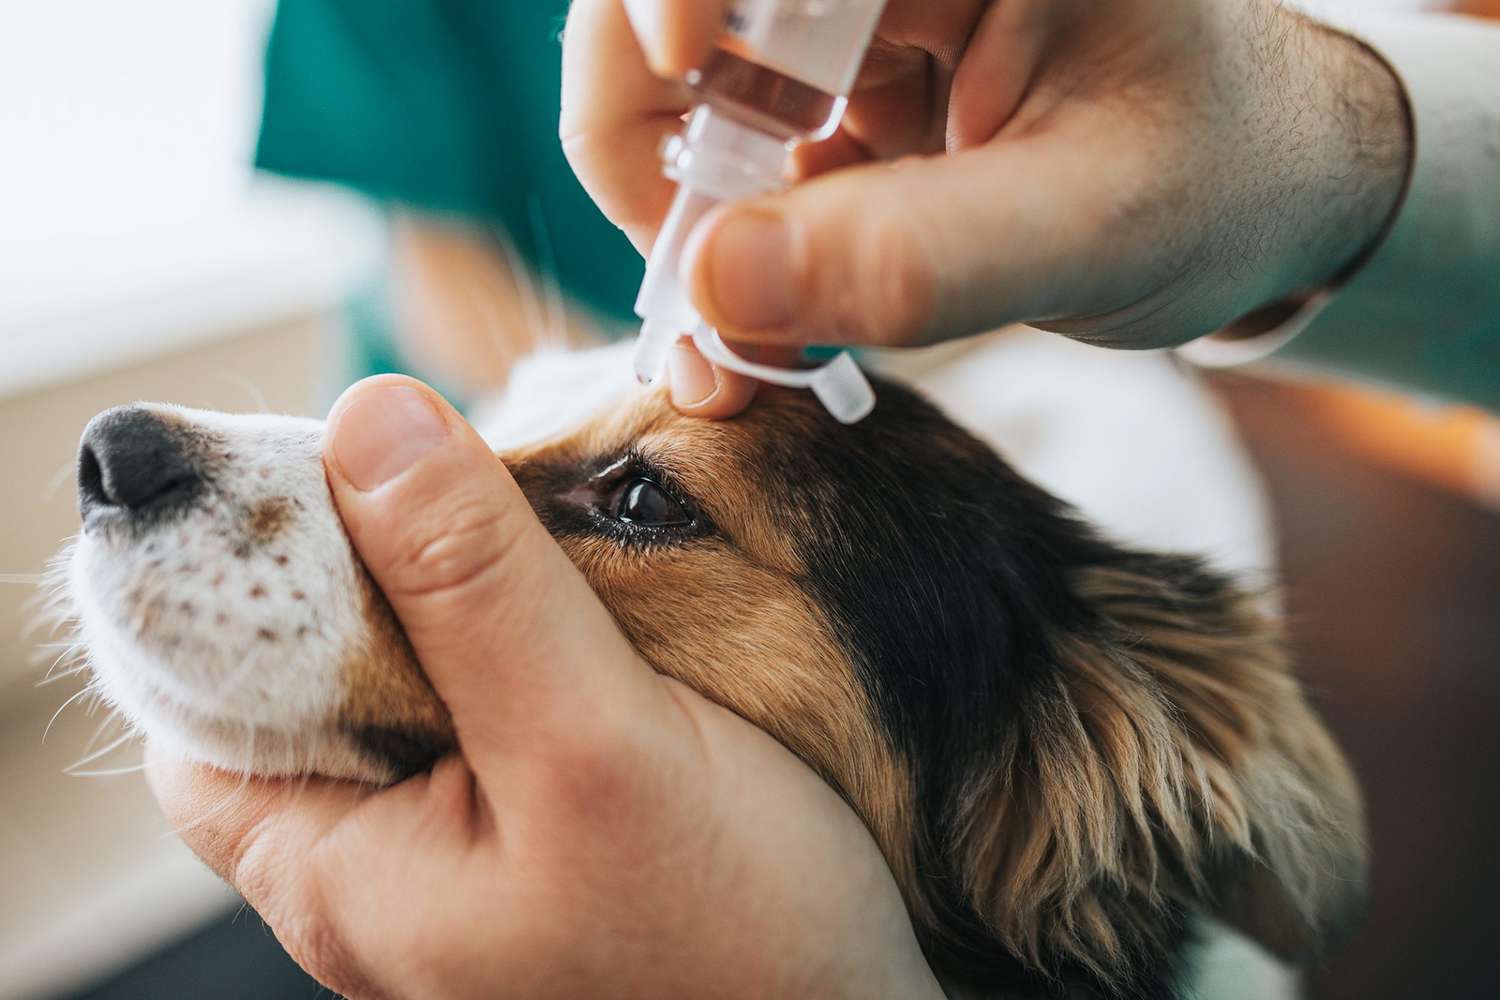 human holding dog's face while putting eyedrops in the dog's eye